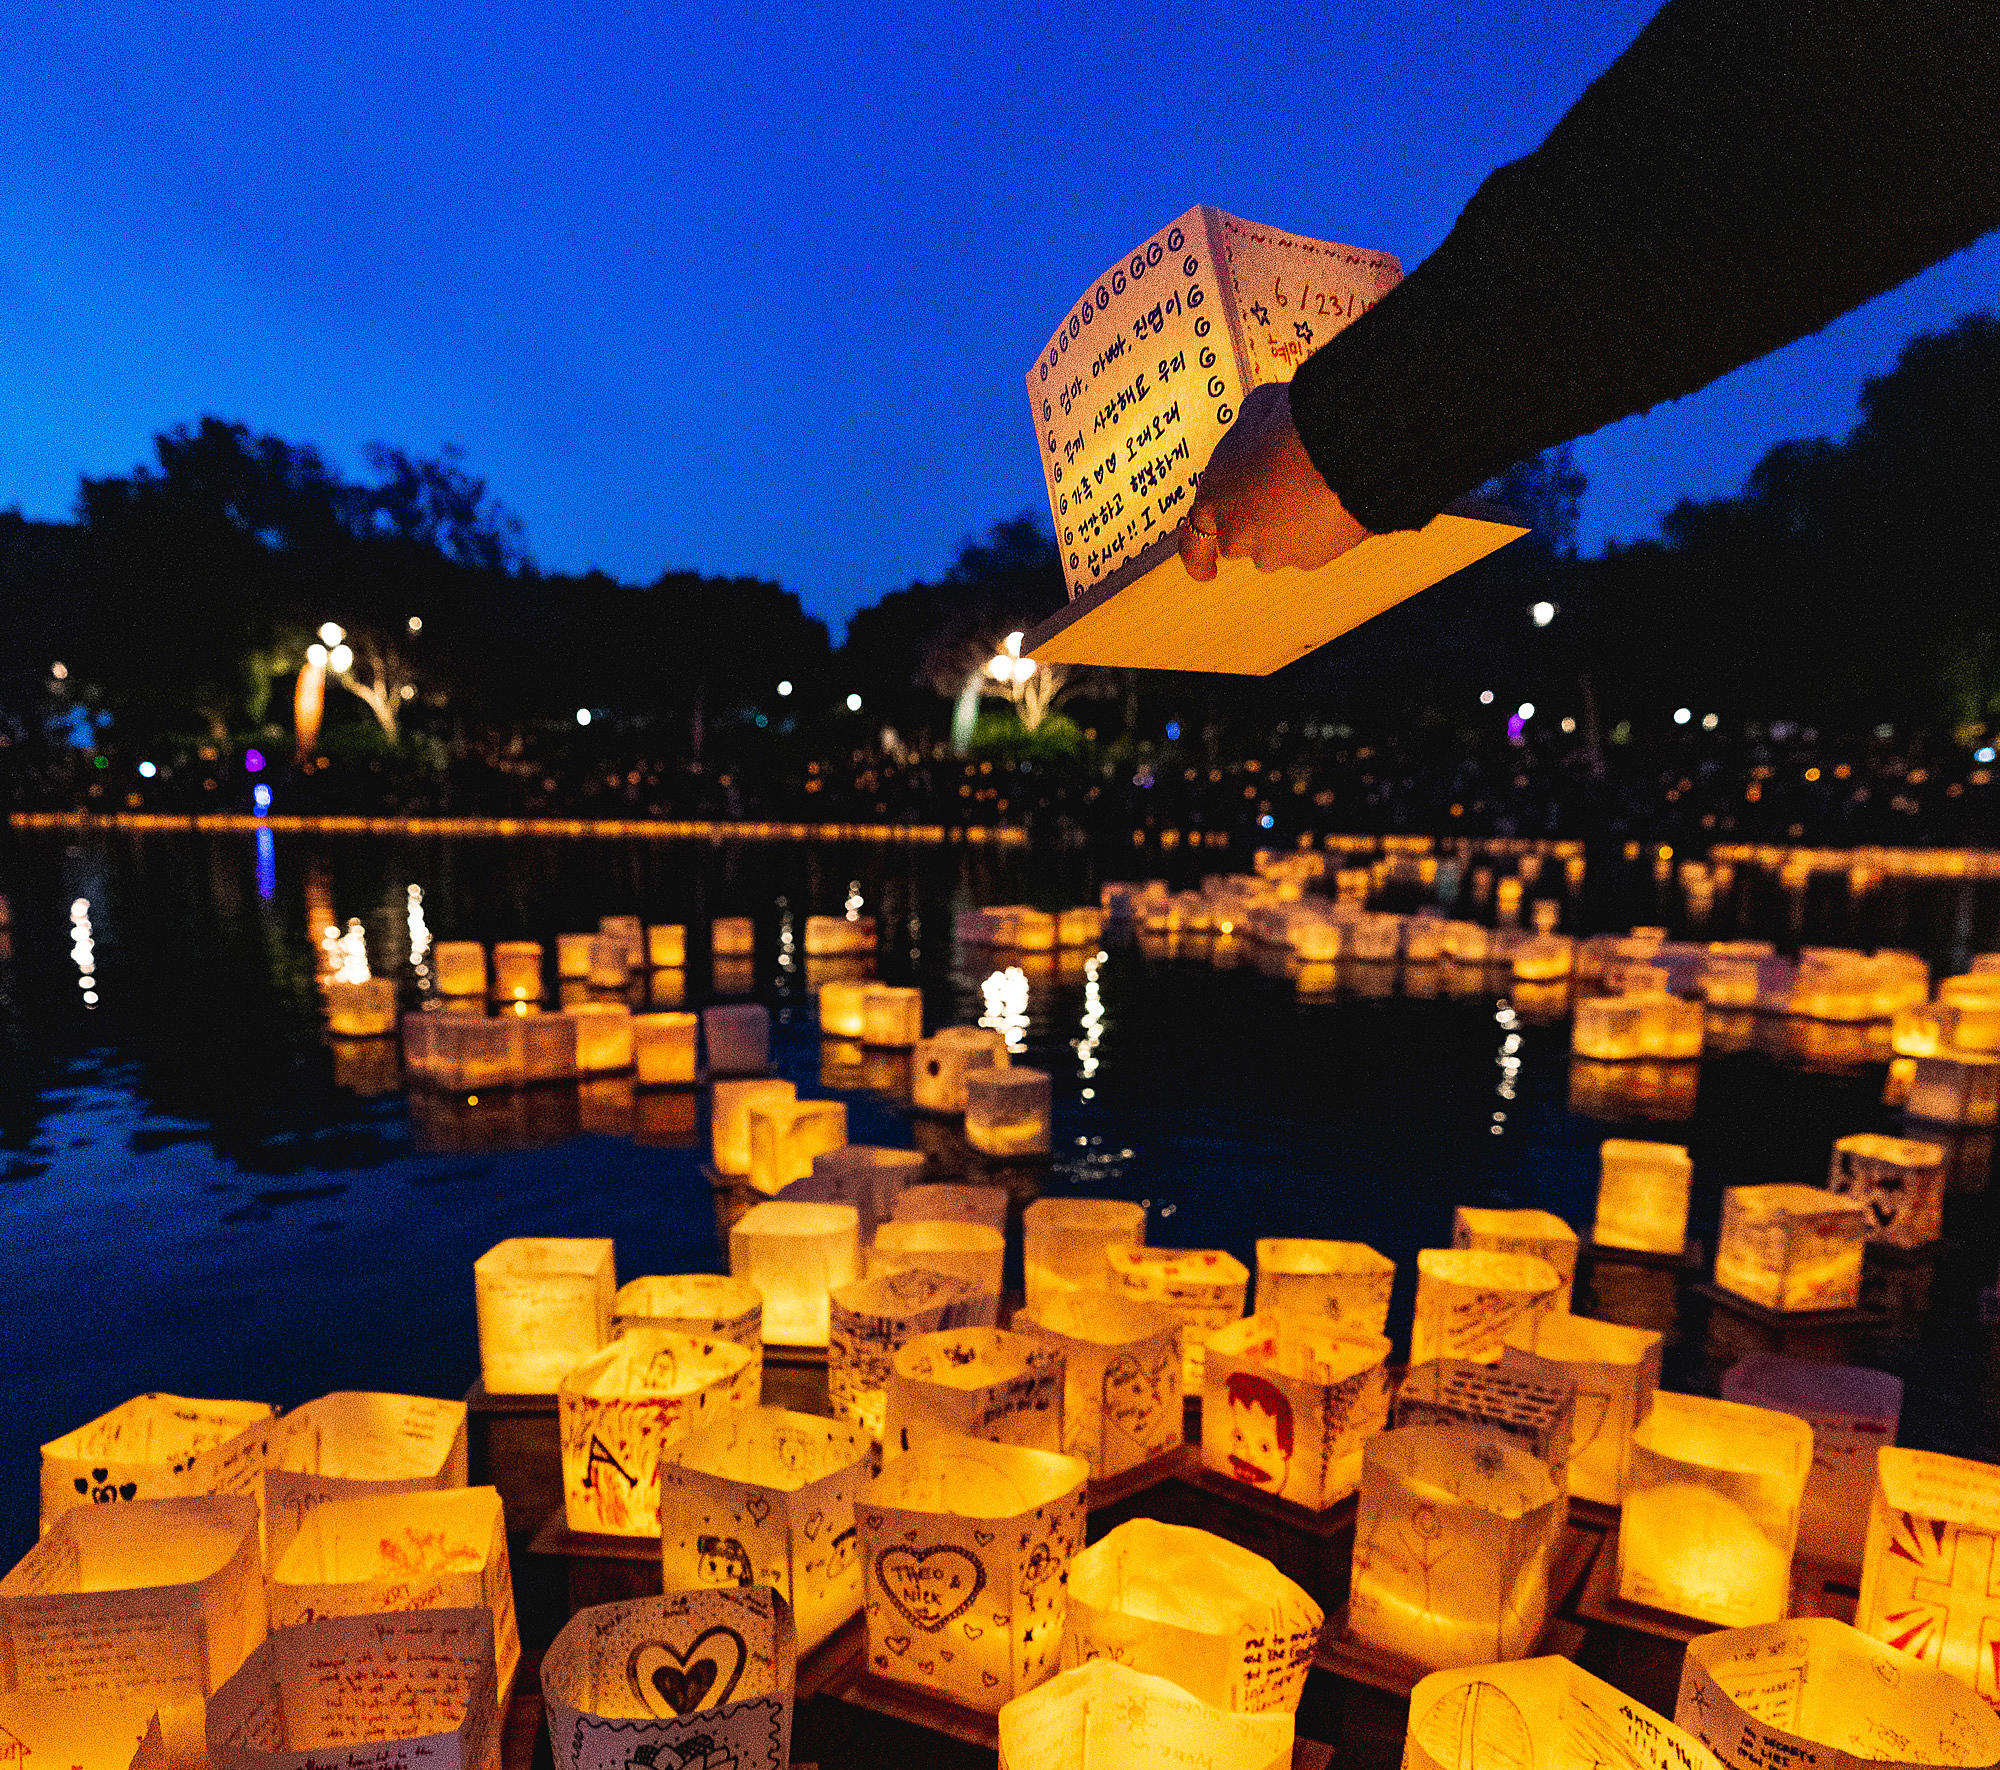 Magical Water Lantern Festival Will Light Up the Lake in CNY